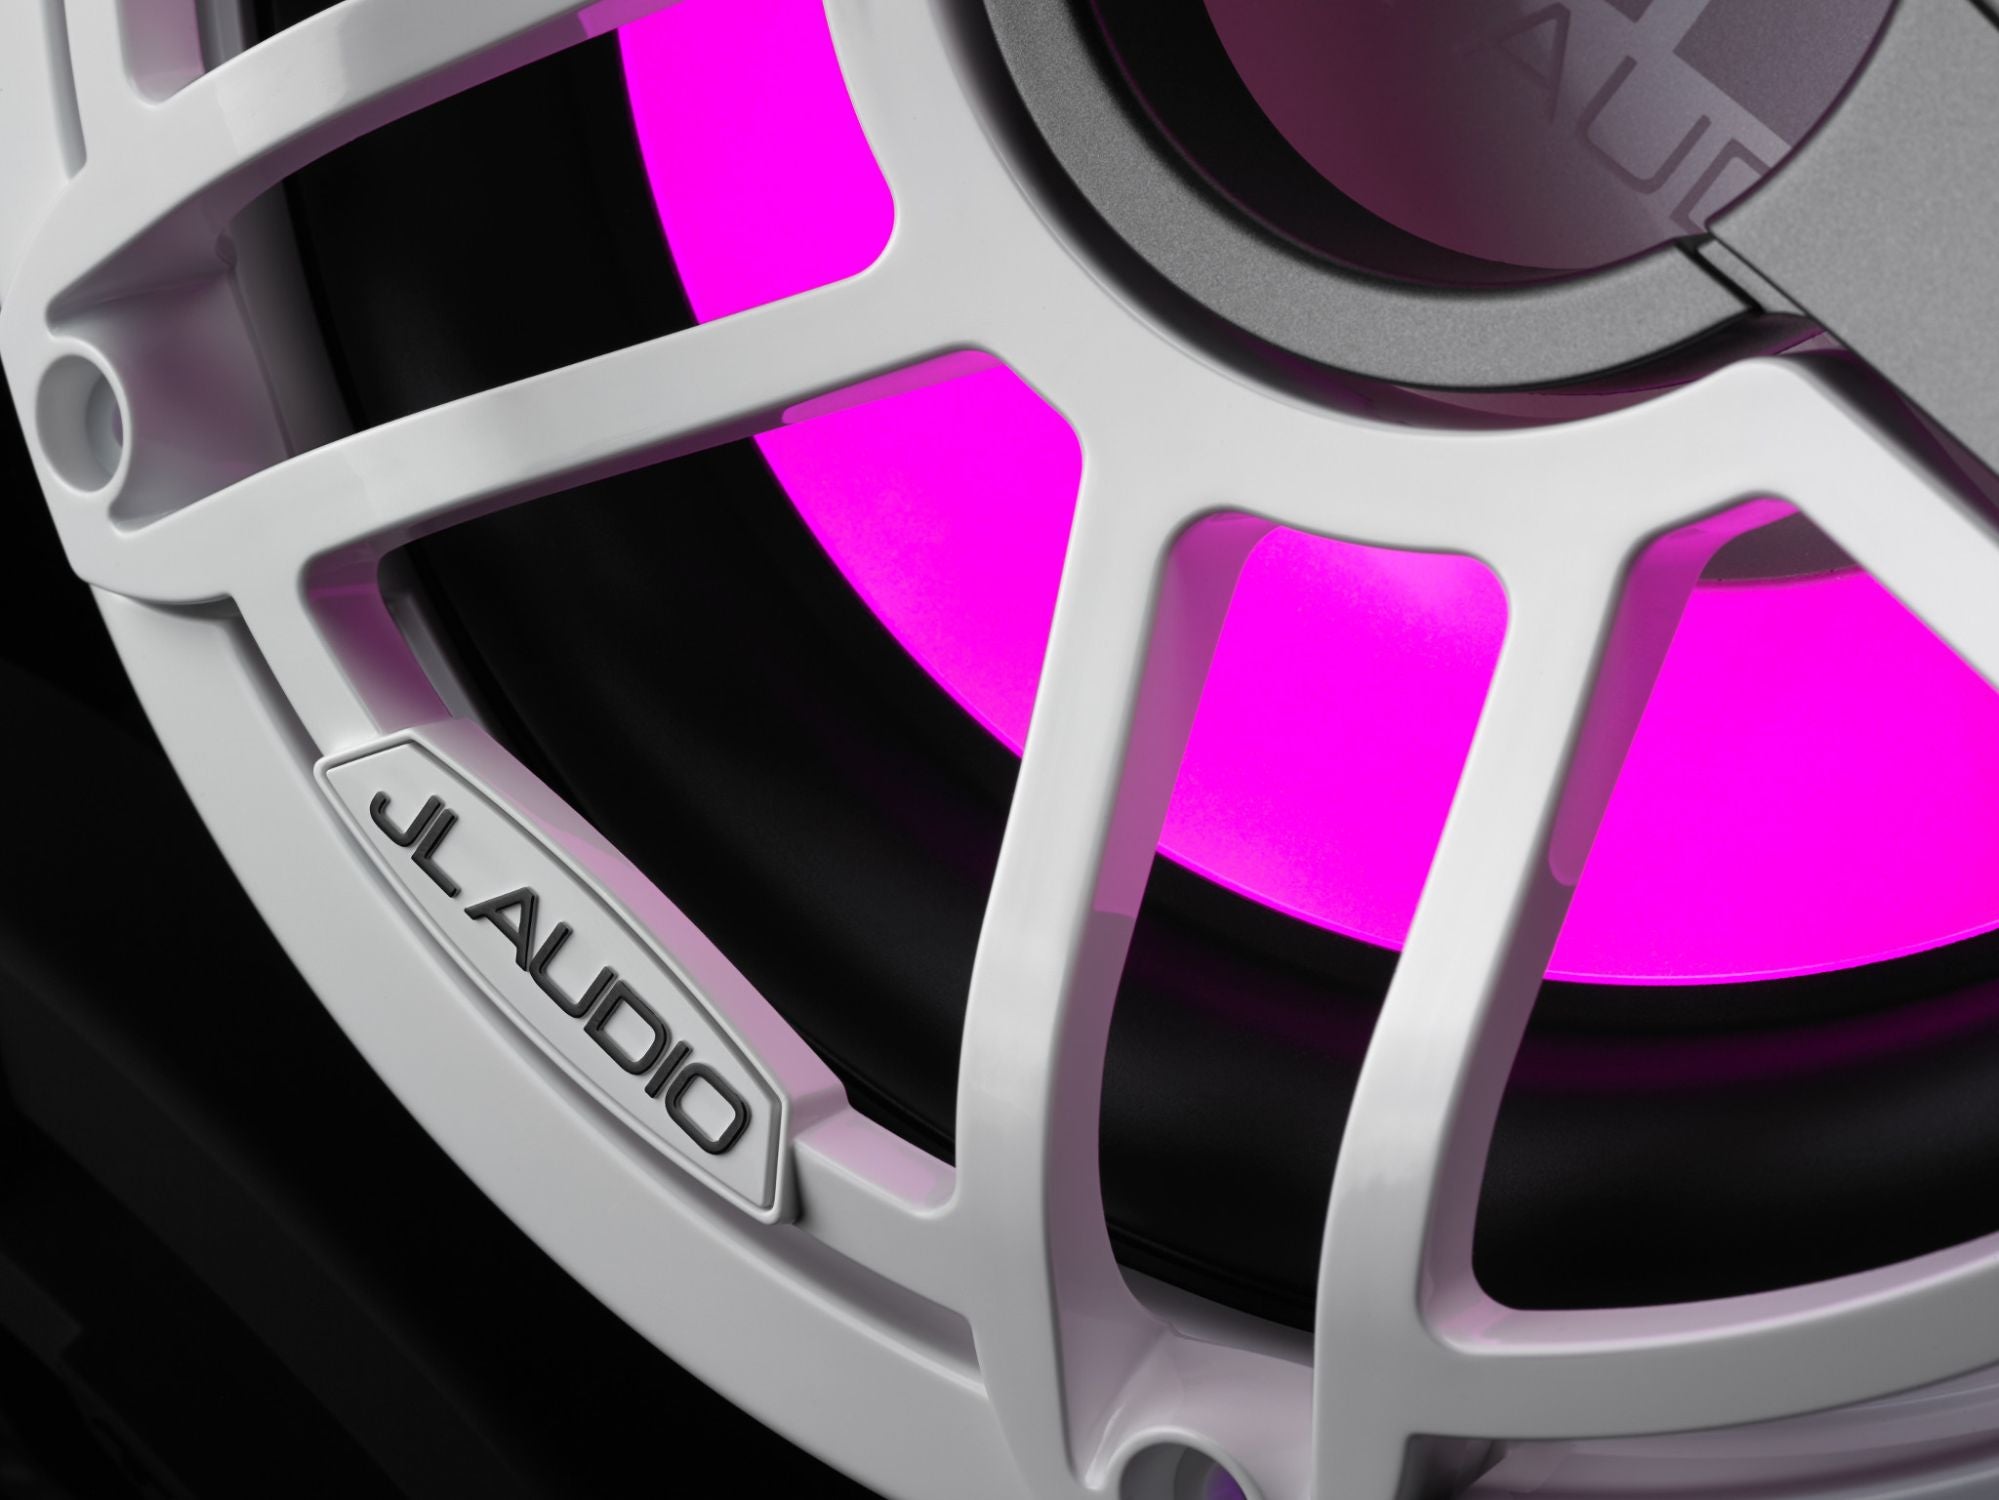 Detail of M6-10W-S-GwGw-i-4 Subwoofer Lit with Pink